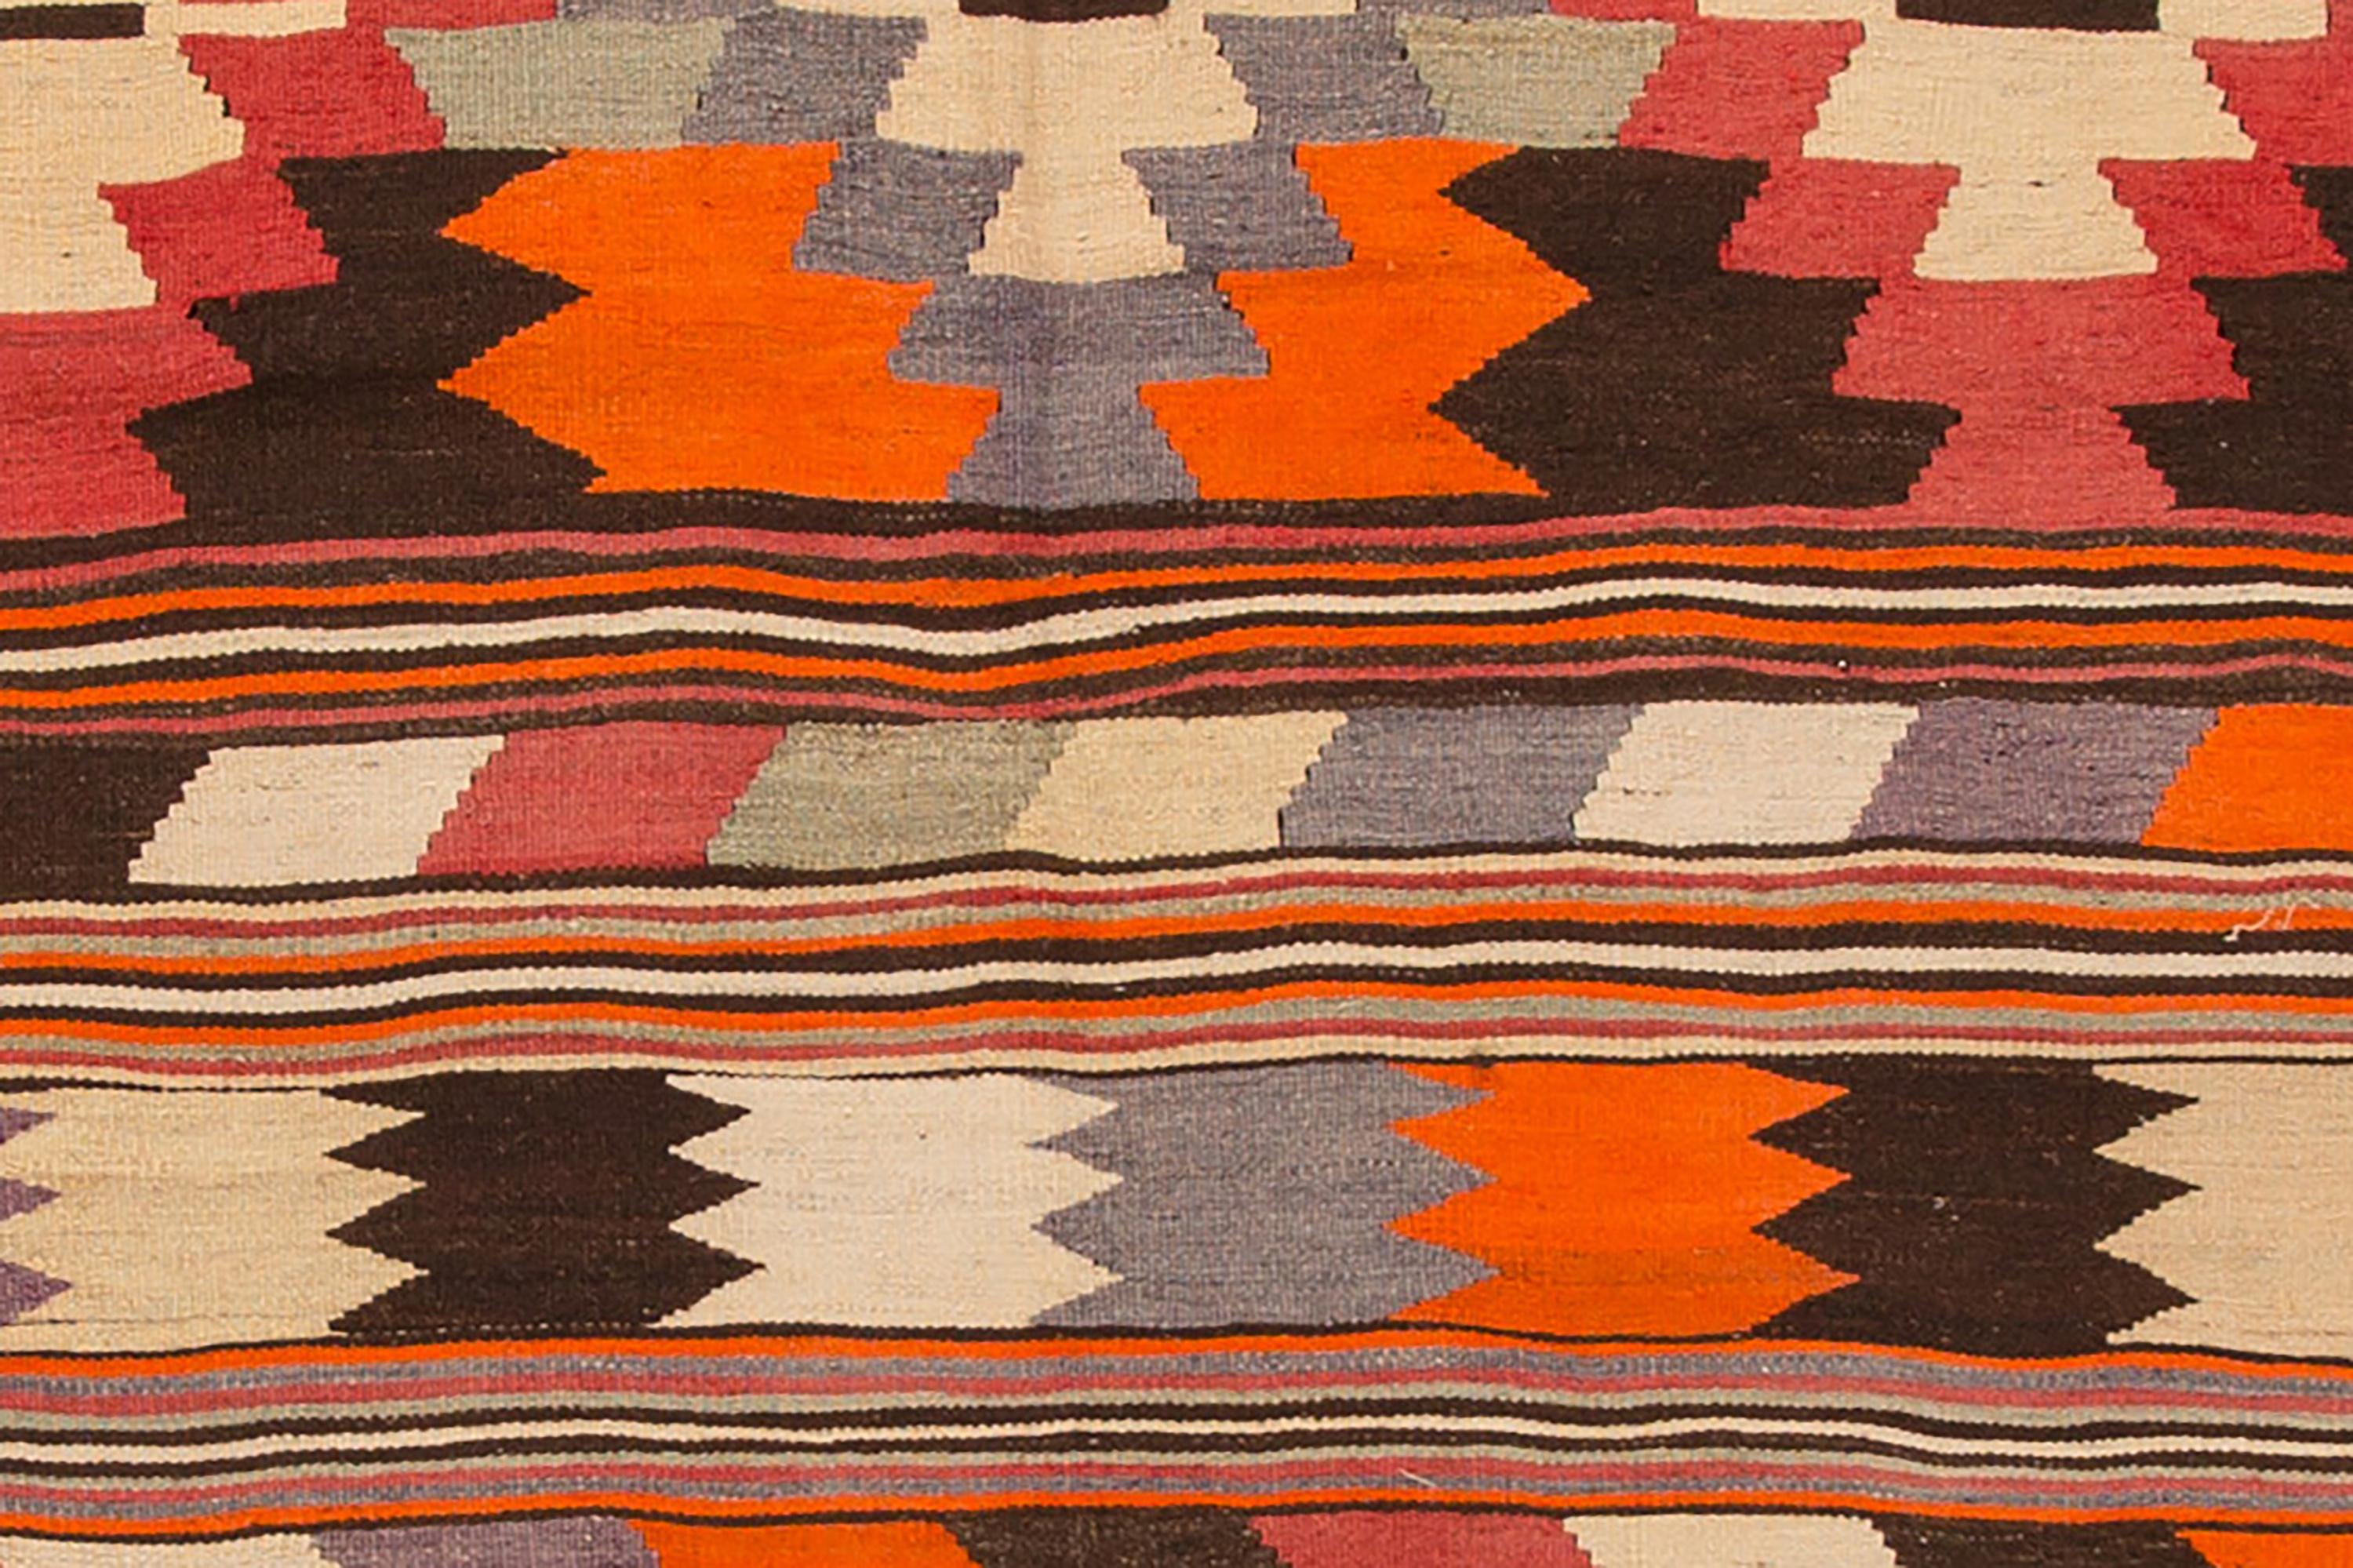 Vintage 1960s Multicolored Geometric Turkish Kilim Rug In Excellent Condition For Sale In Norwalk, CT